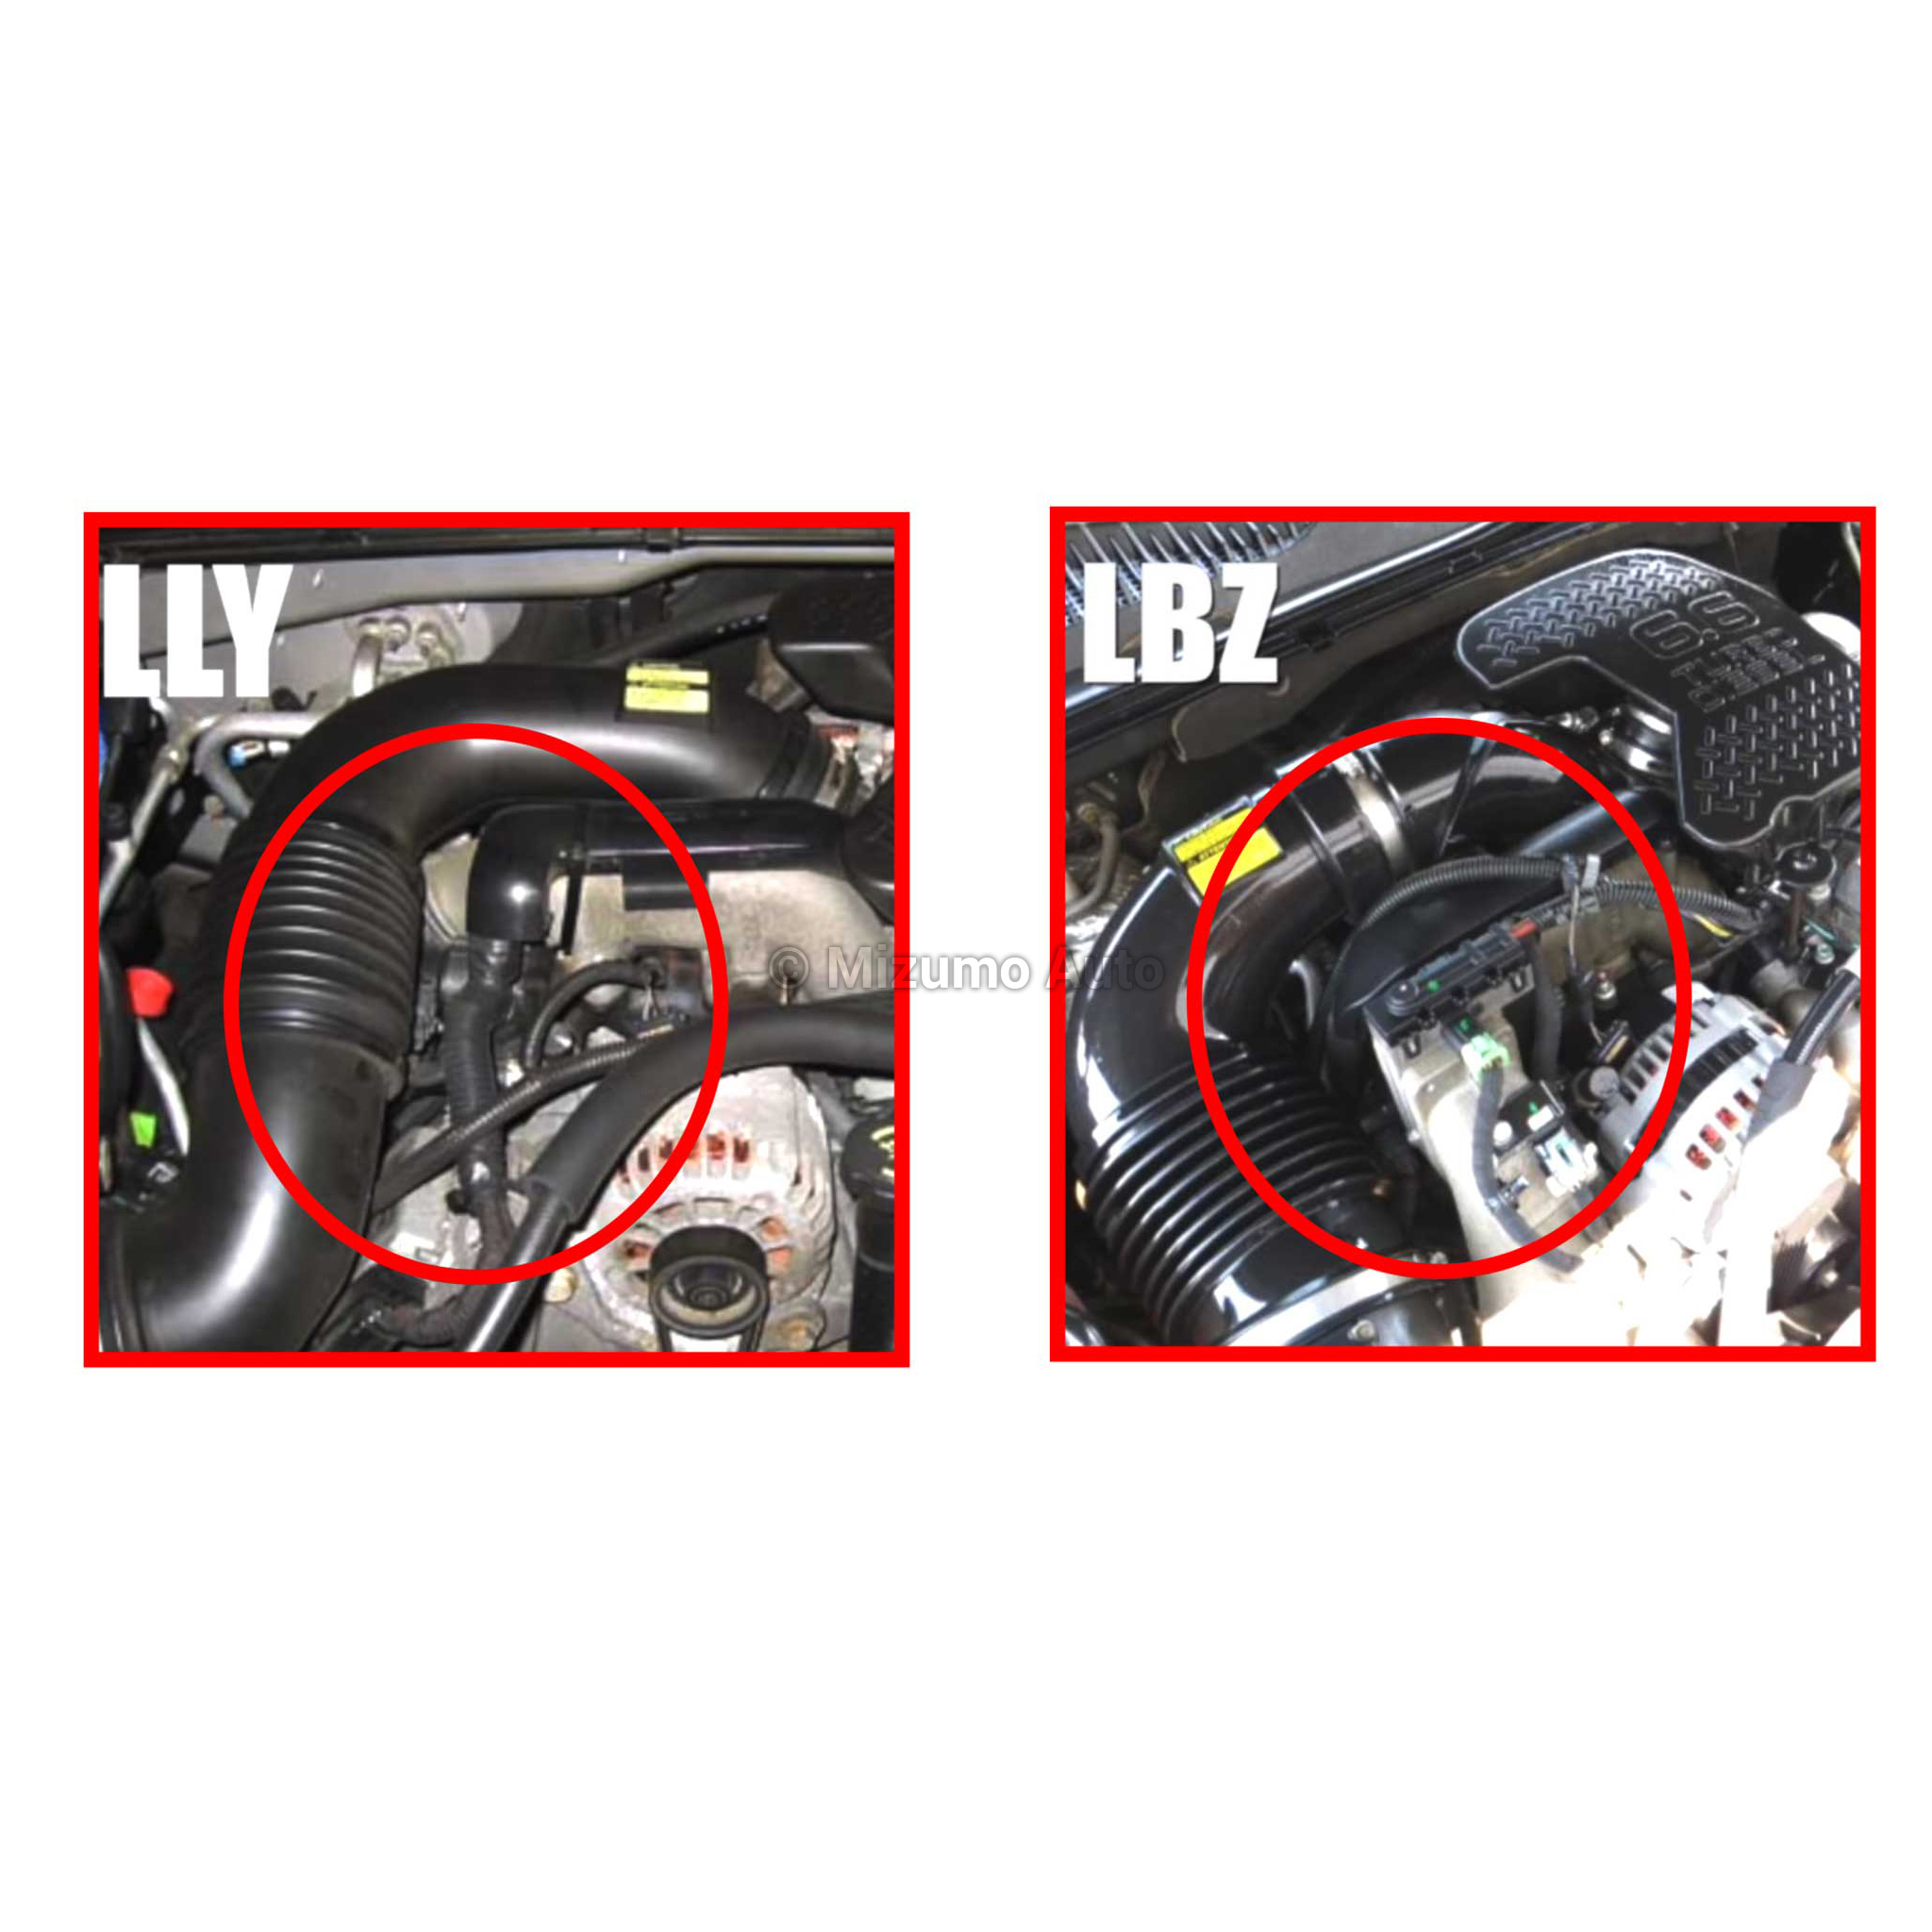 how to get rid of egr light on lbz